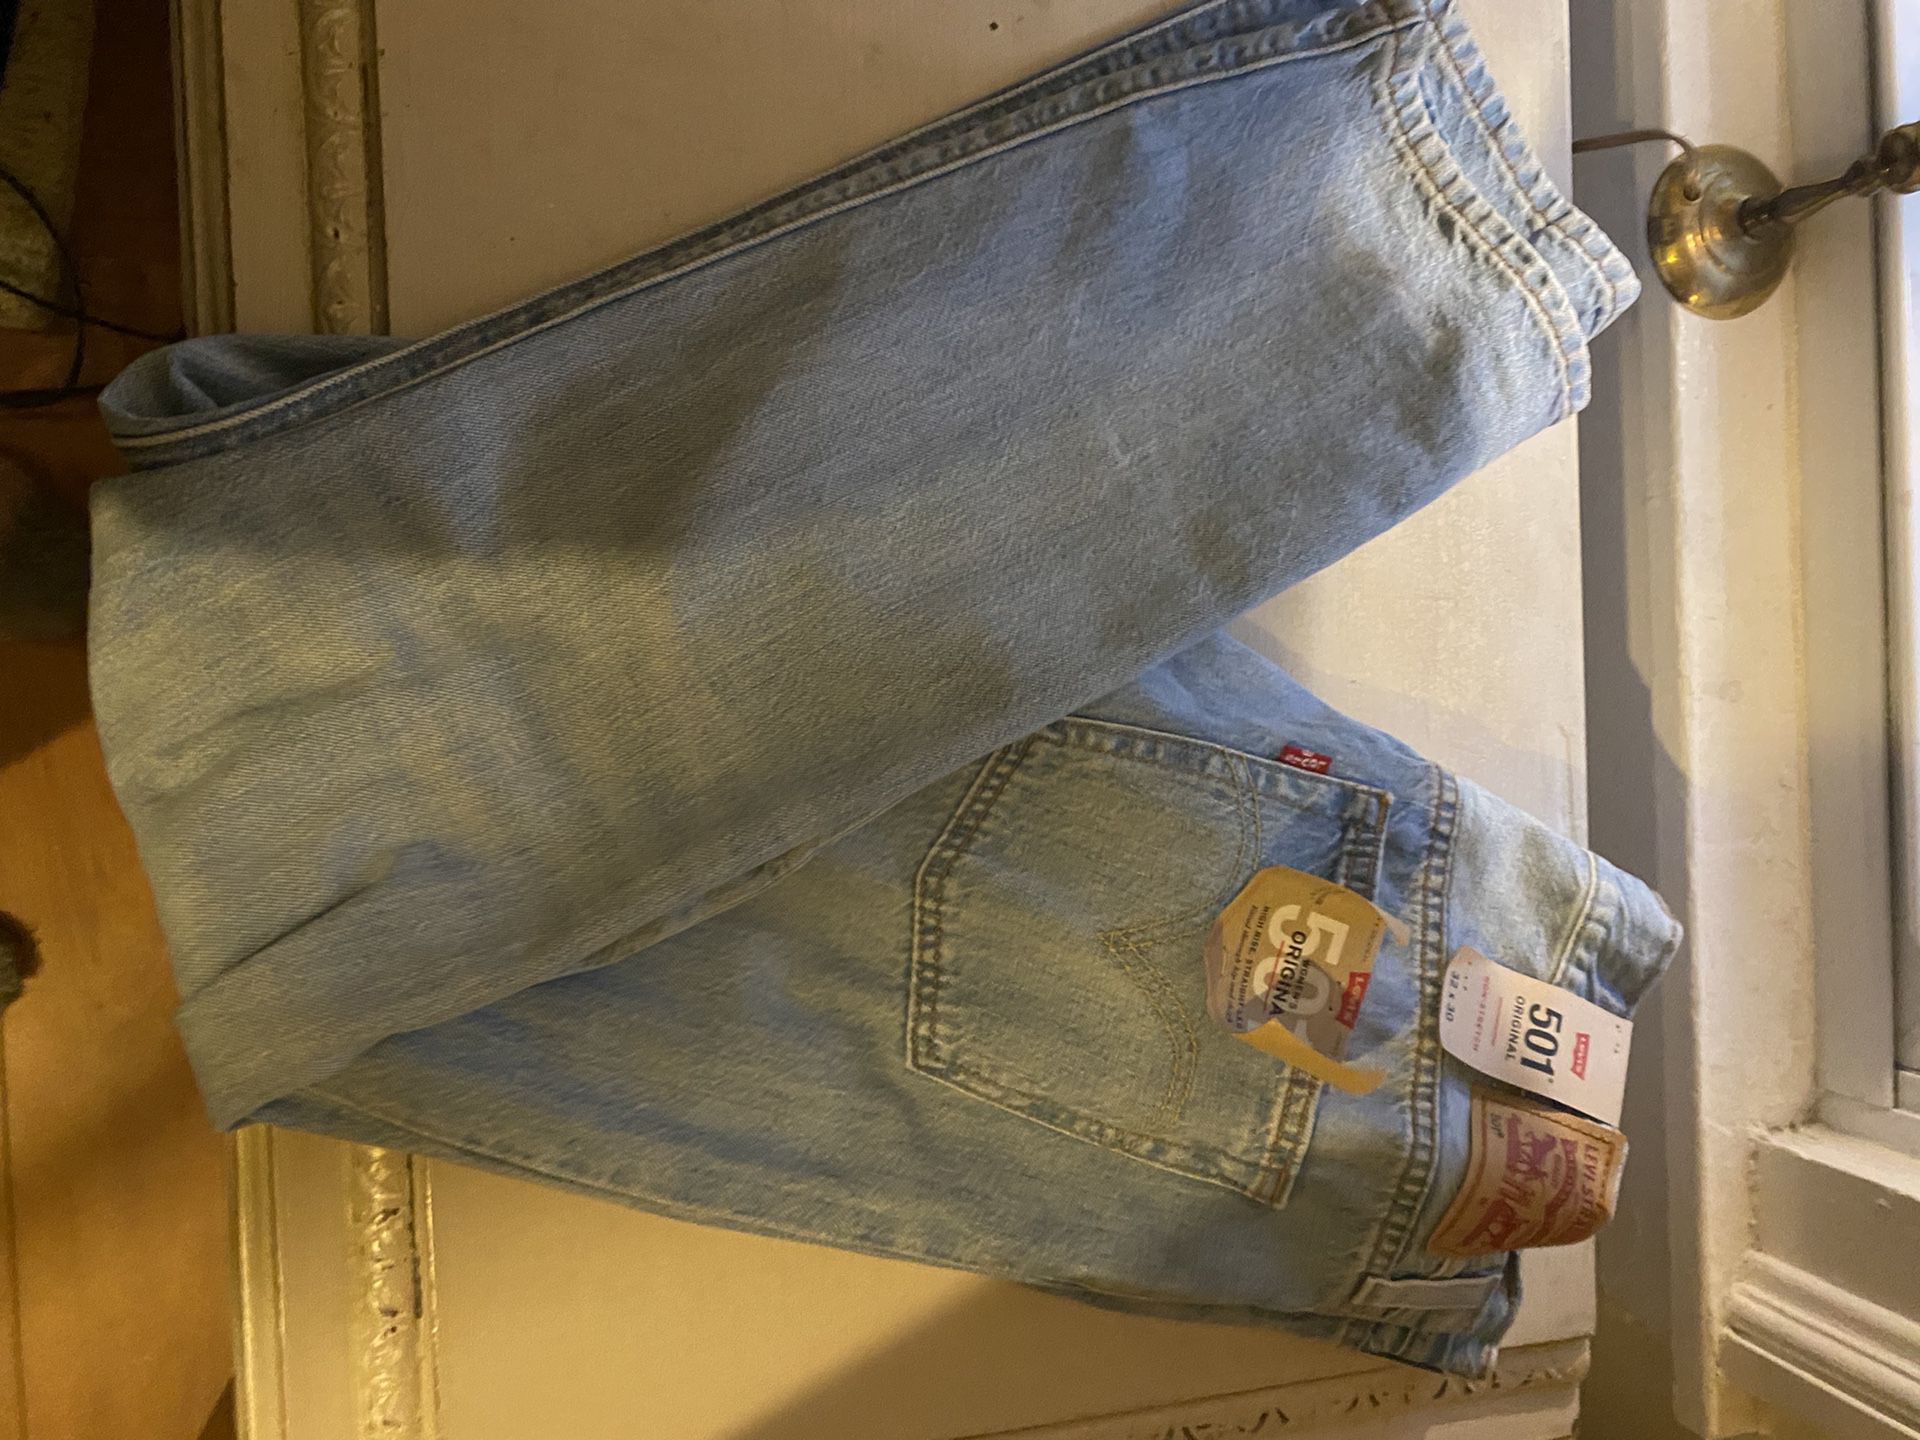 Nwt Woman’s Levi’s 501 Distressed High Rise Button Fly Jeans Size 32 X 30